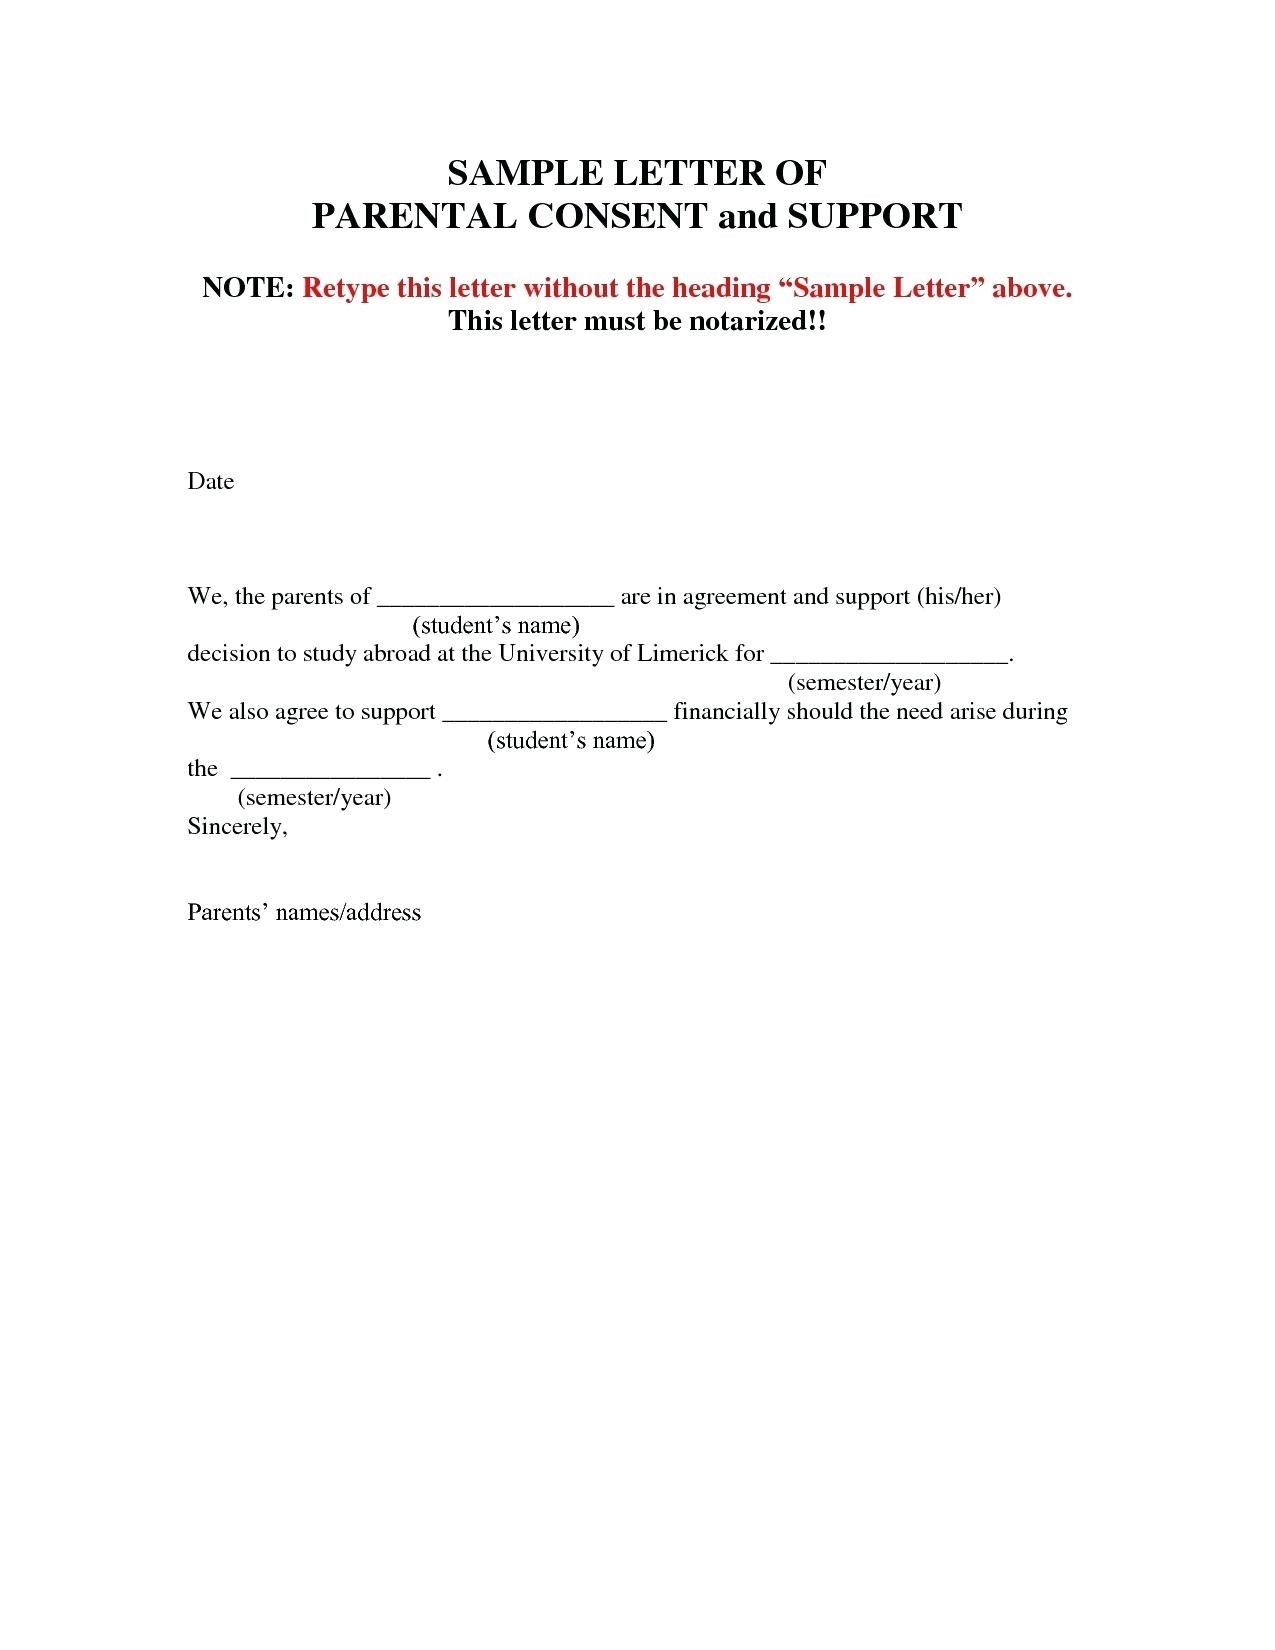 request-letter-for-permission-to-use-a-venue-01-best-letter-template